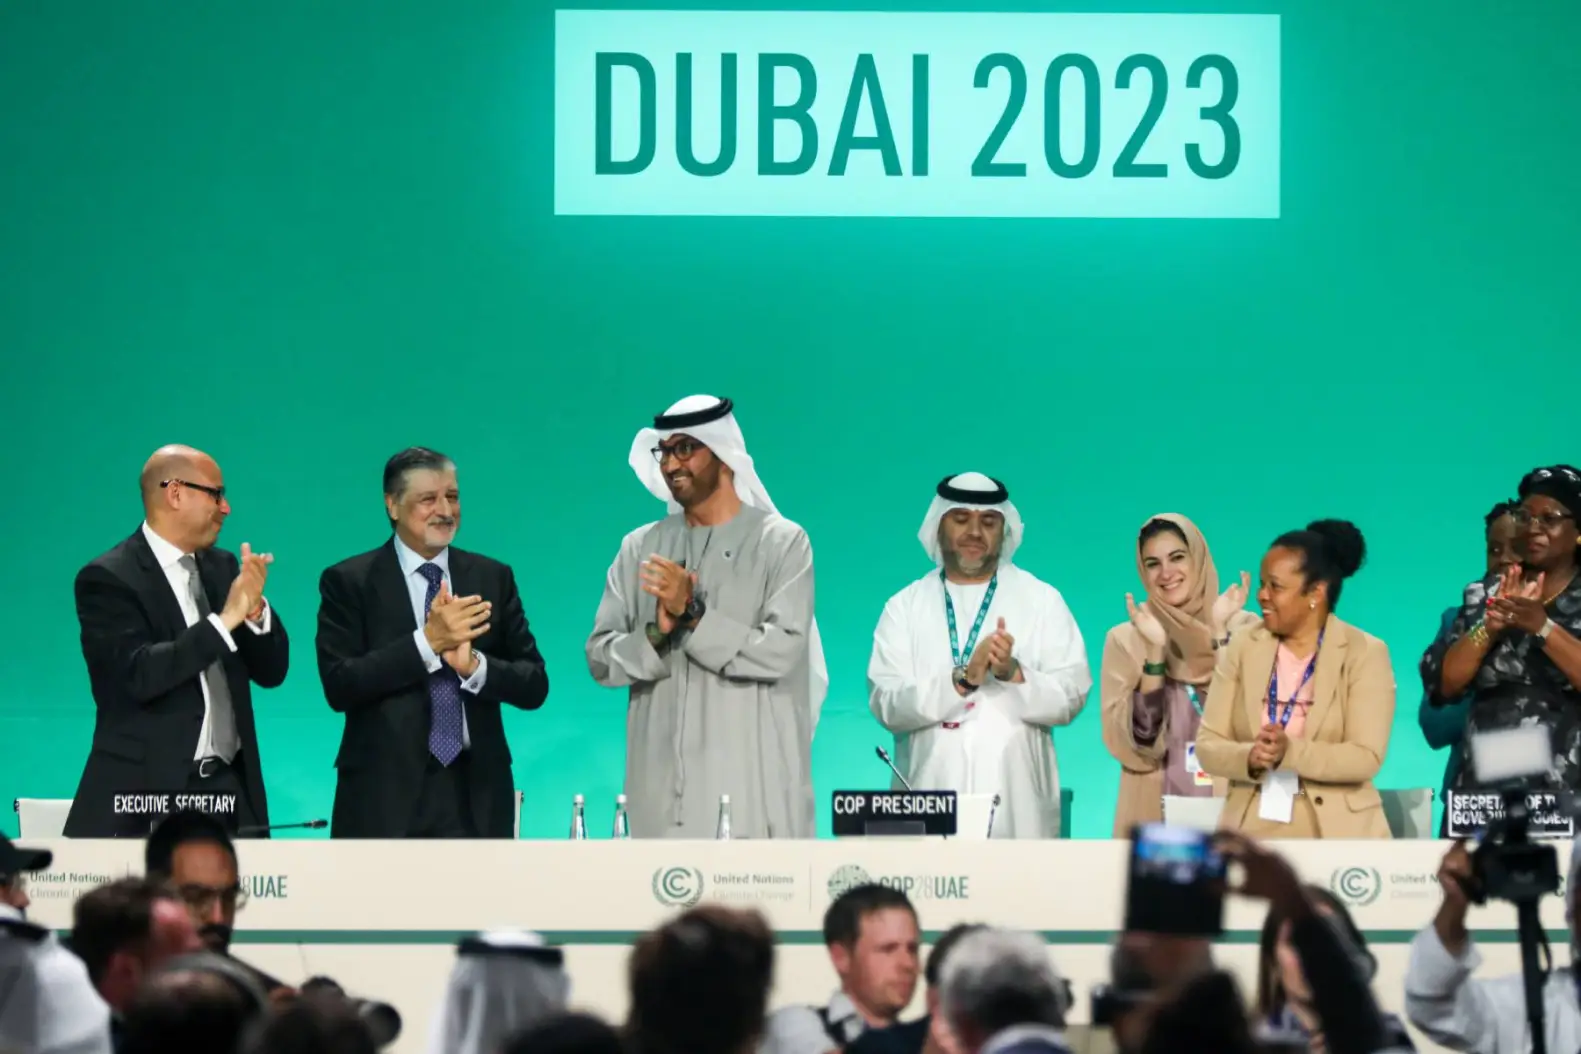 people are clapping in front of a giant screen written Dubai 2023 on it